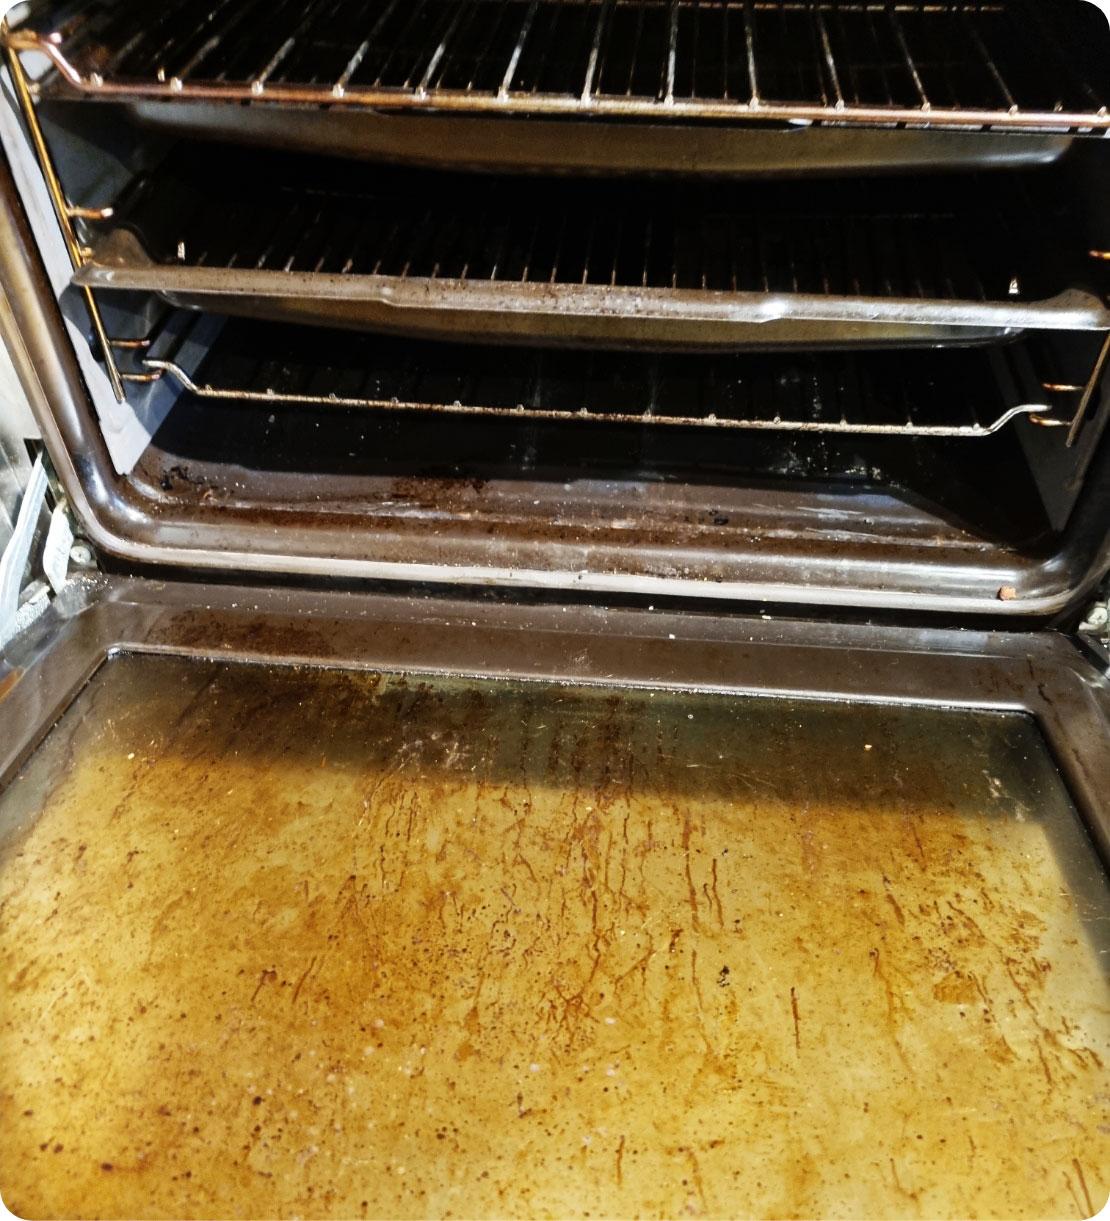 The image shows a dirty oven before cleaning.